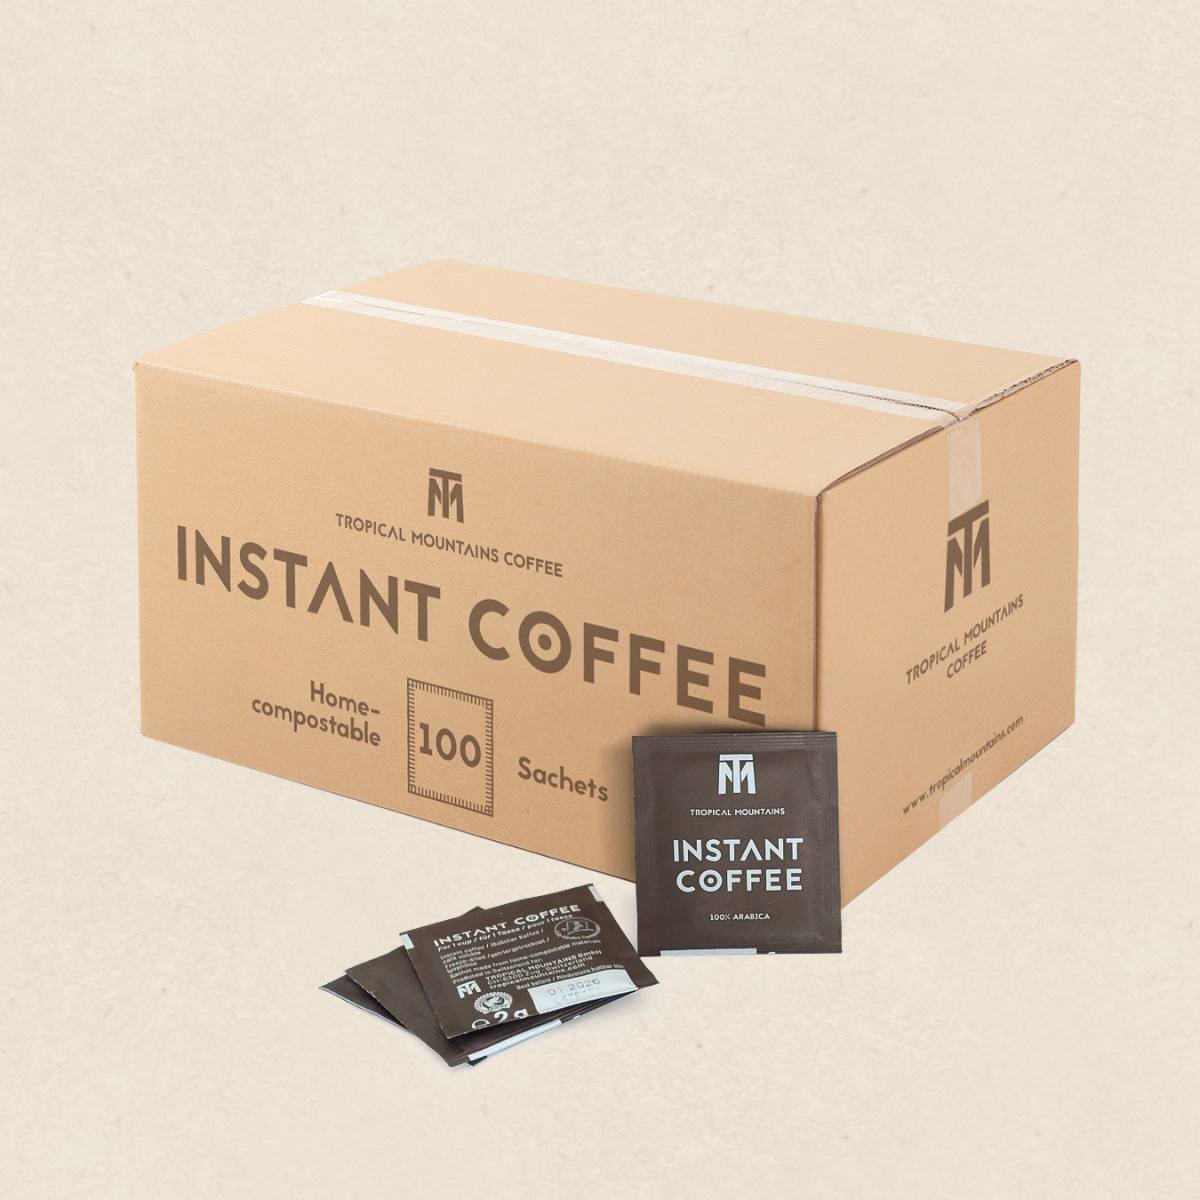 INSTANT COFFEE 100 Sachets home-compostable